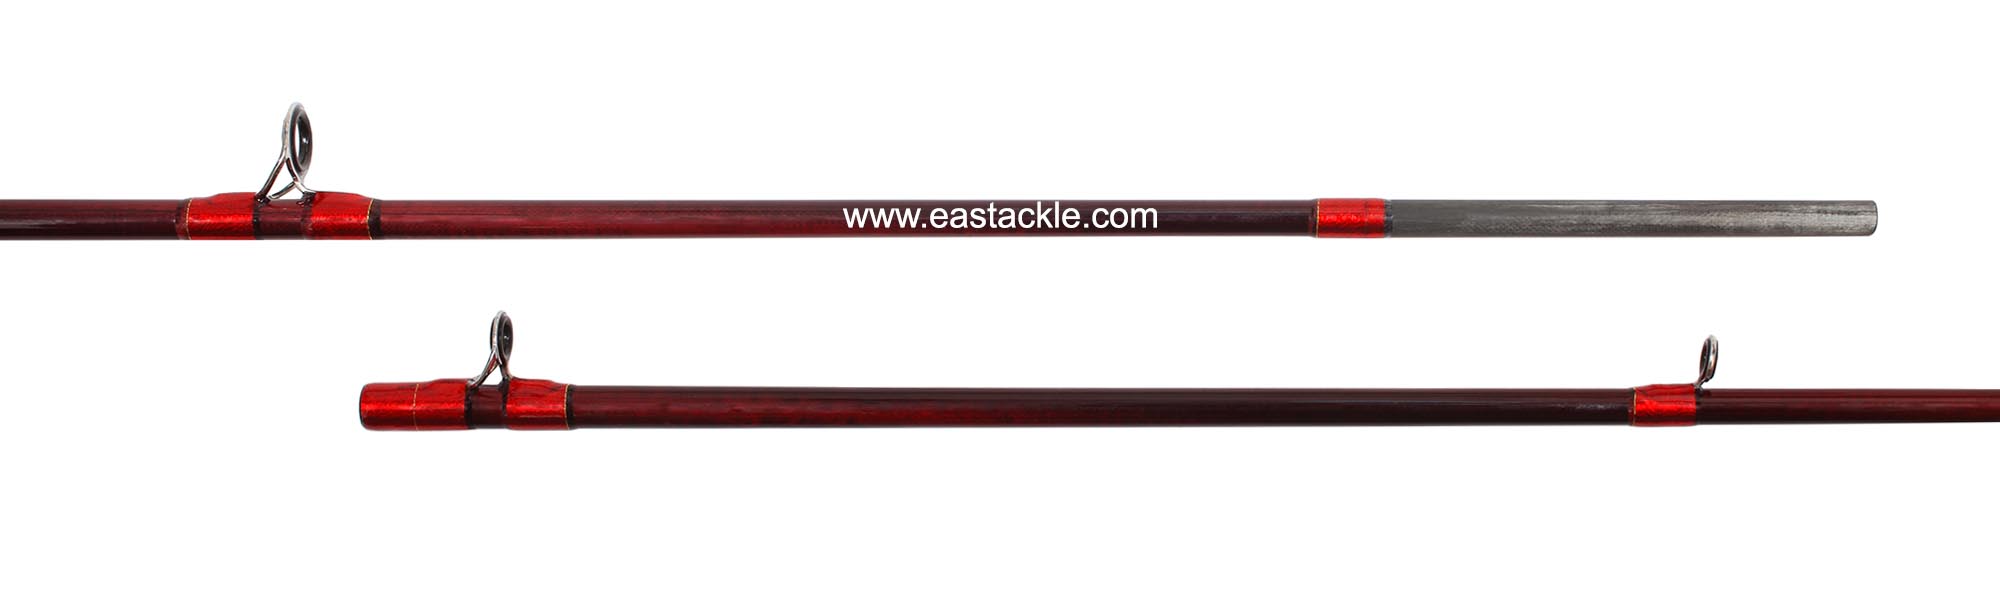 Rapala - Vaaksy - 80th Anniversary - VAC662M - Bait Casting Rod - Joint Section (Side View) | Eastackle